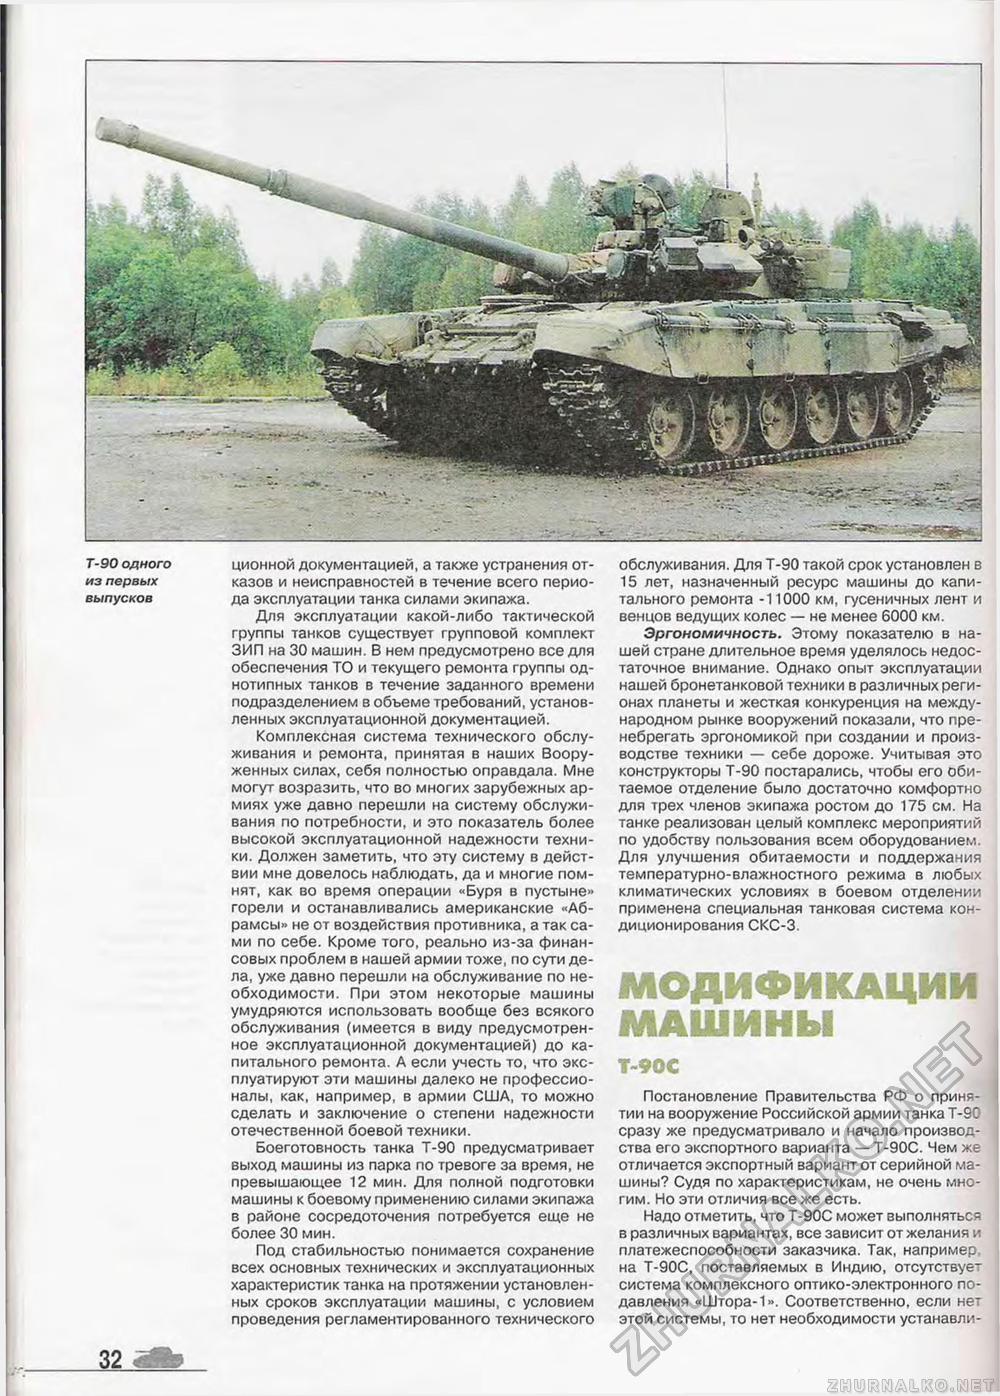  Special - T-90,  34